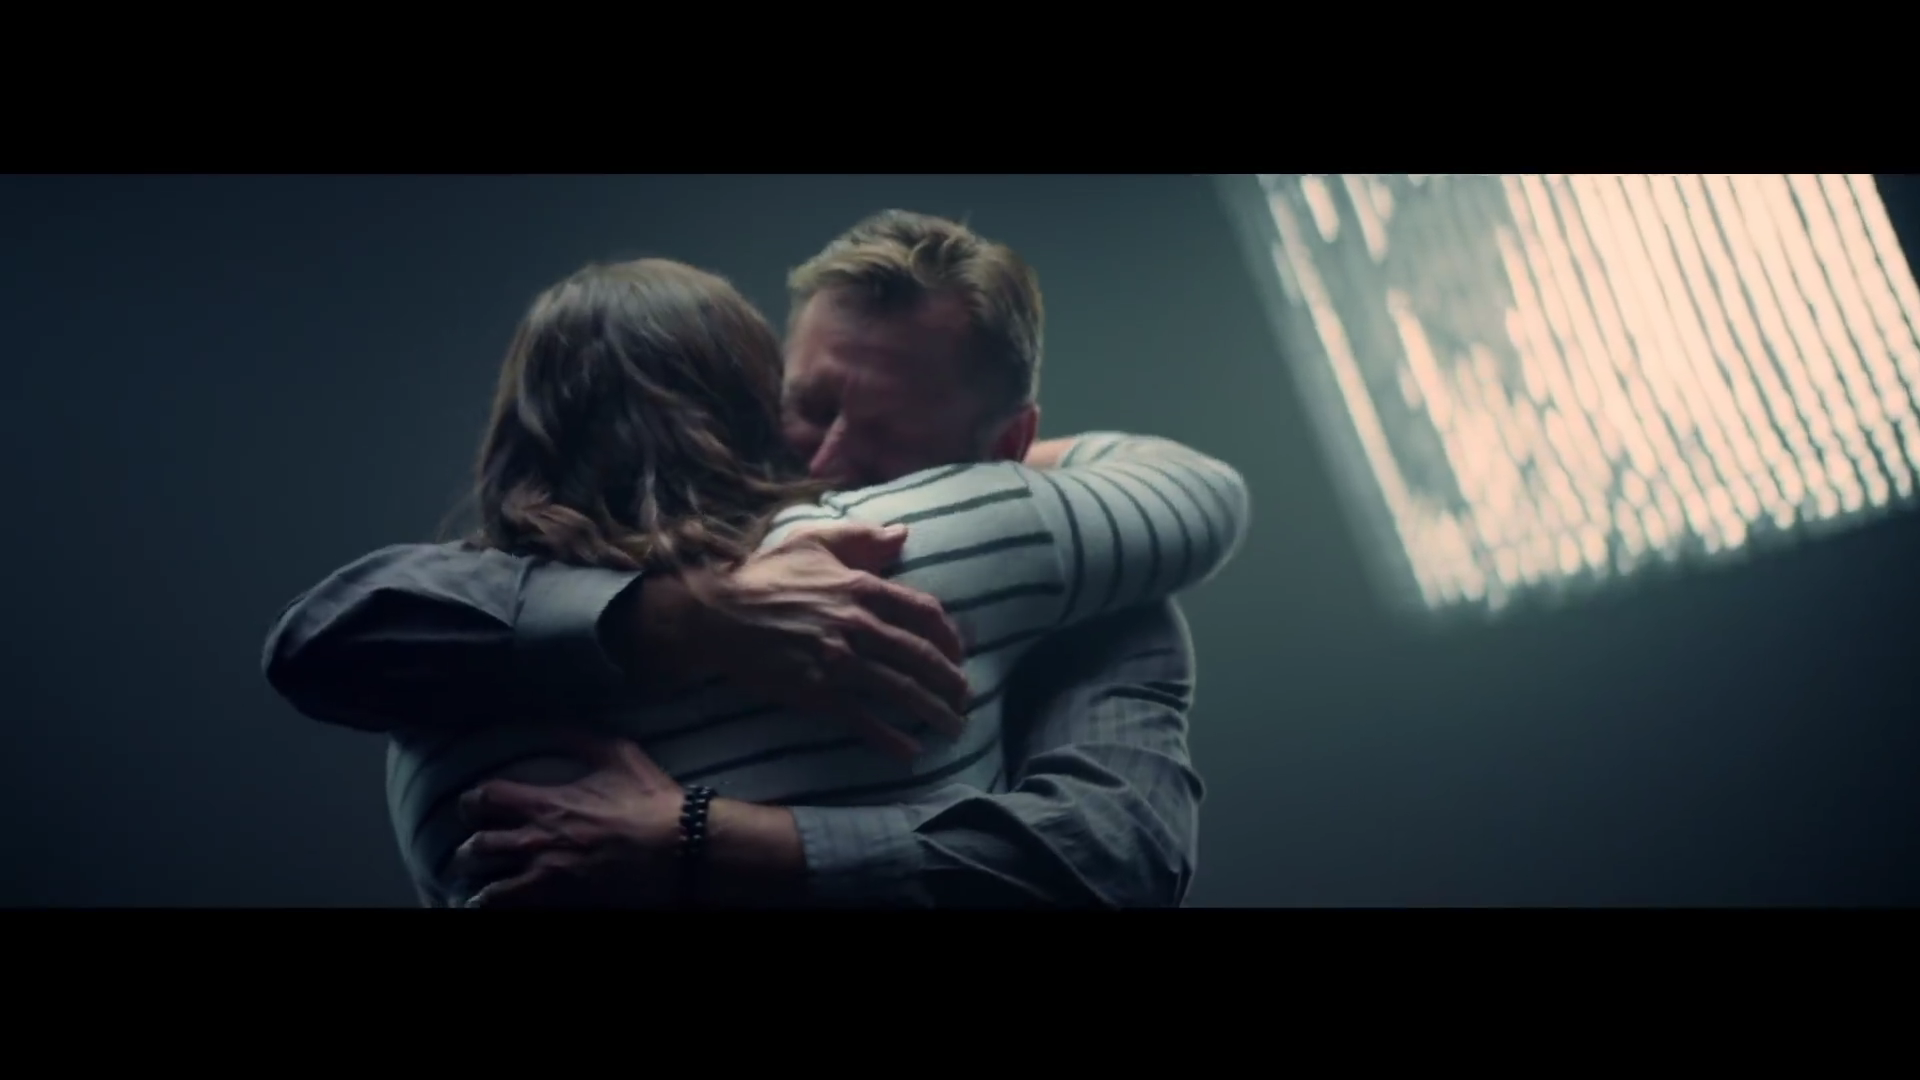 New Netflix Film Brings Together Estranged Dads And Daughters For Emotional Promo